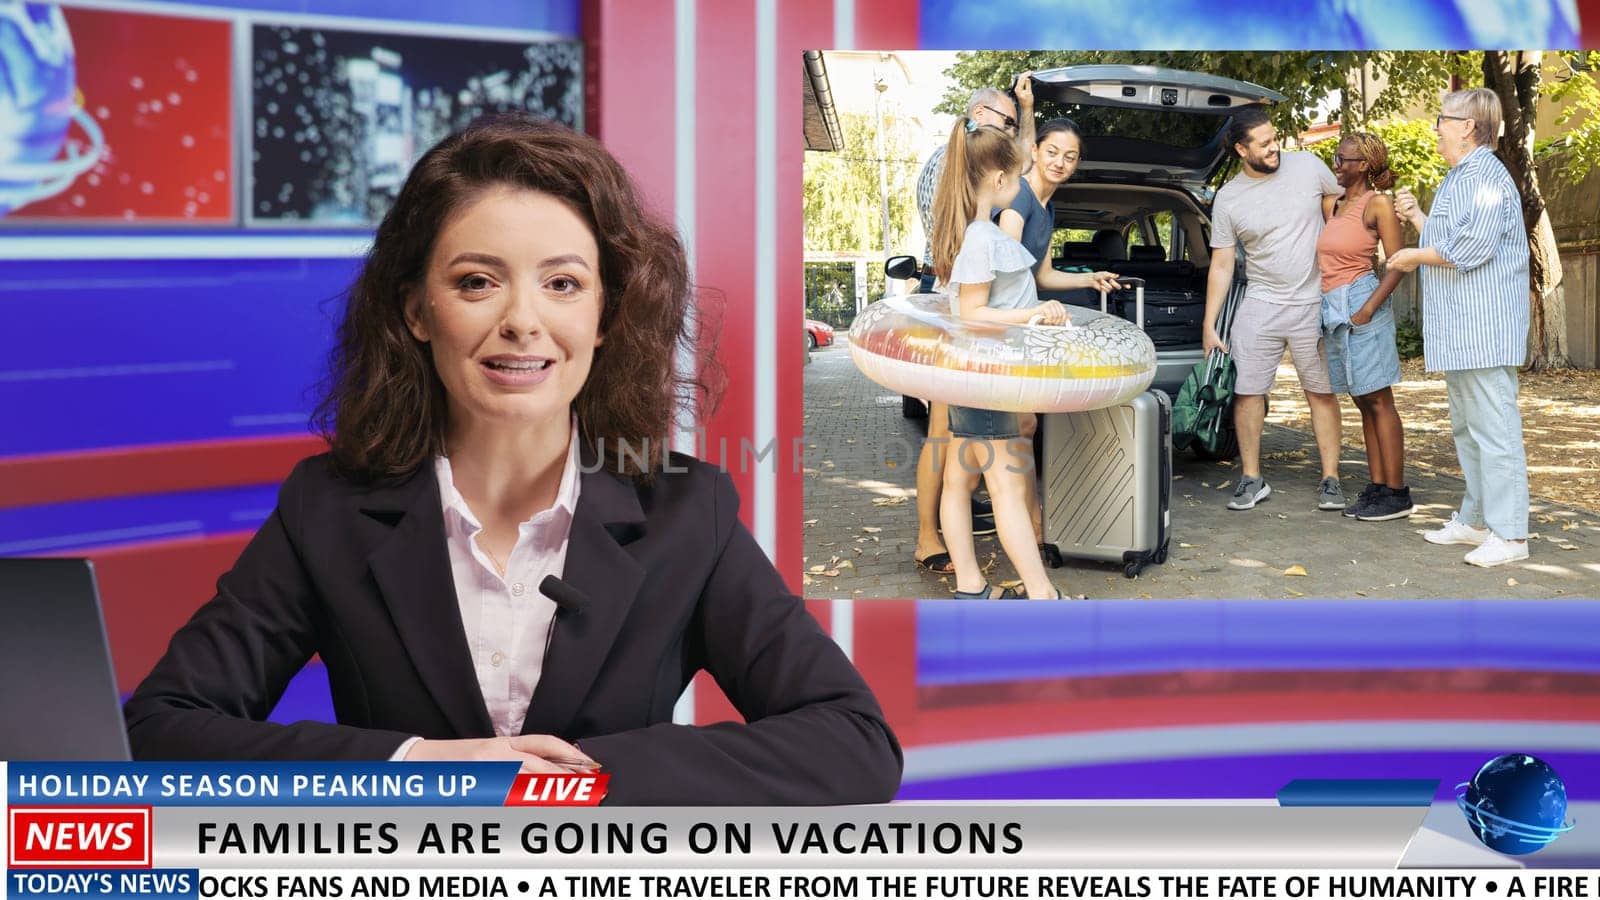 News reporter presents summer vacations on live television, showing footage of families enjoying holidays in the sun and roadtrips. Woman newscaster covering leisure activities topic.